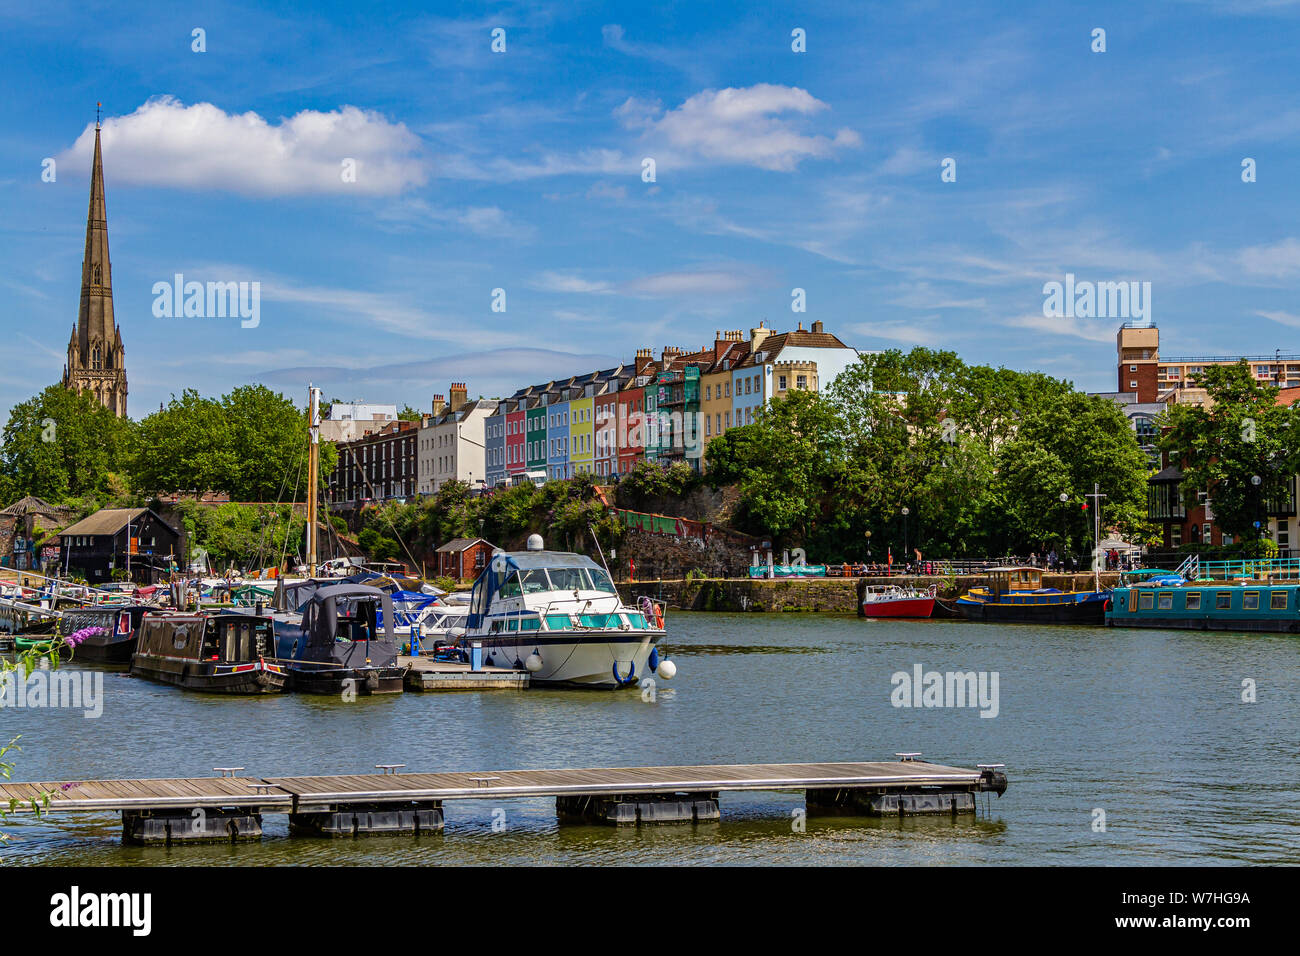 View over Bristol's Floating Harbour towards Redcliffe, with Redcliffe Parade and St Mary Redcliffe Church in the background. Bristol, UK. July 2019. Stock Photo